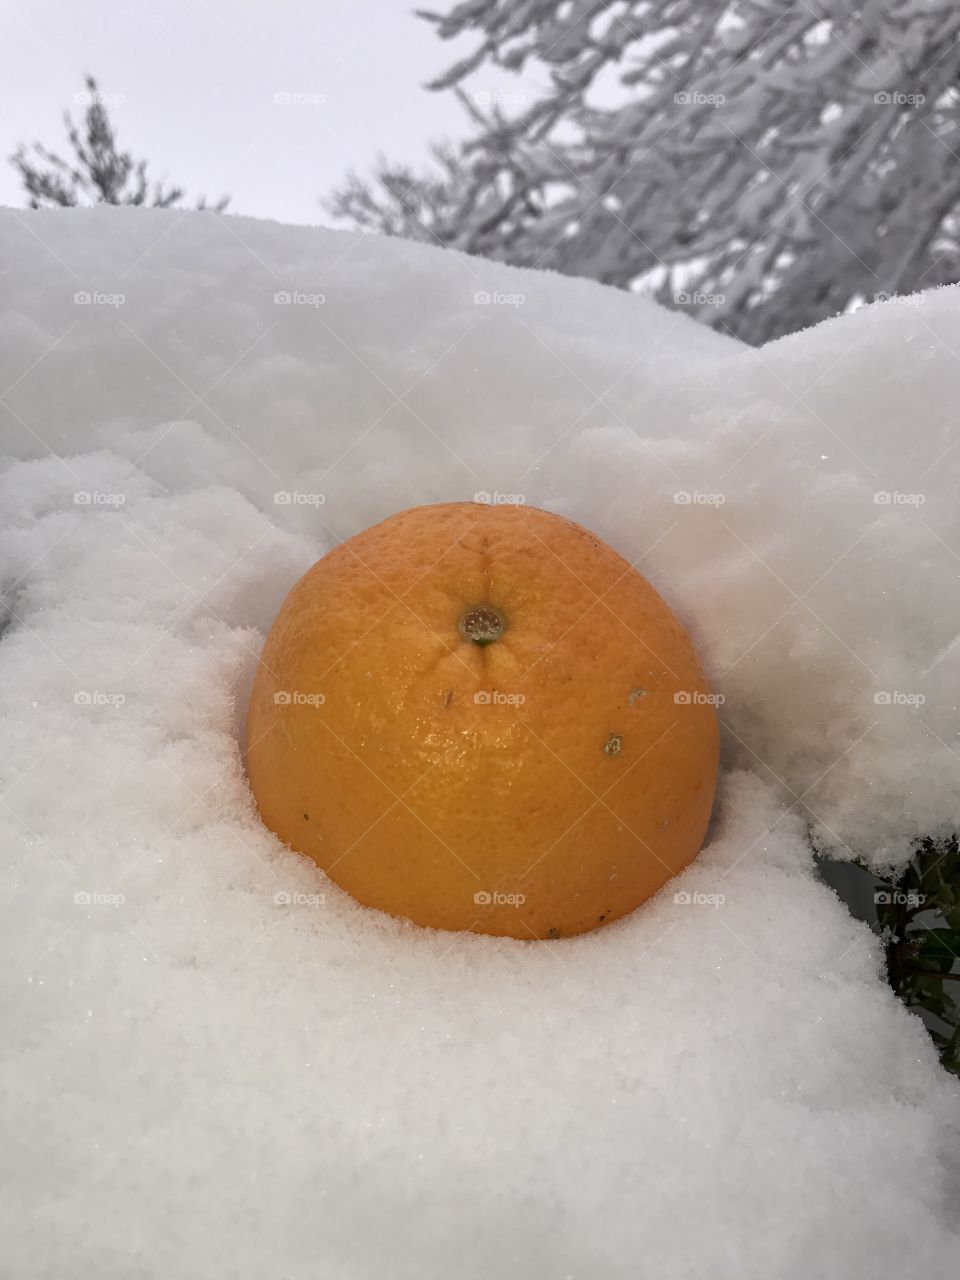 My favorite fruit in the snow 